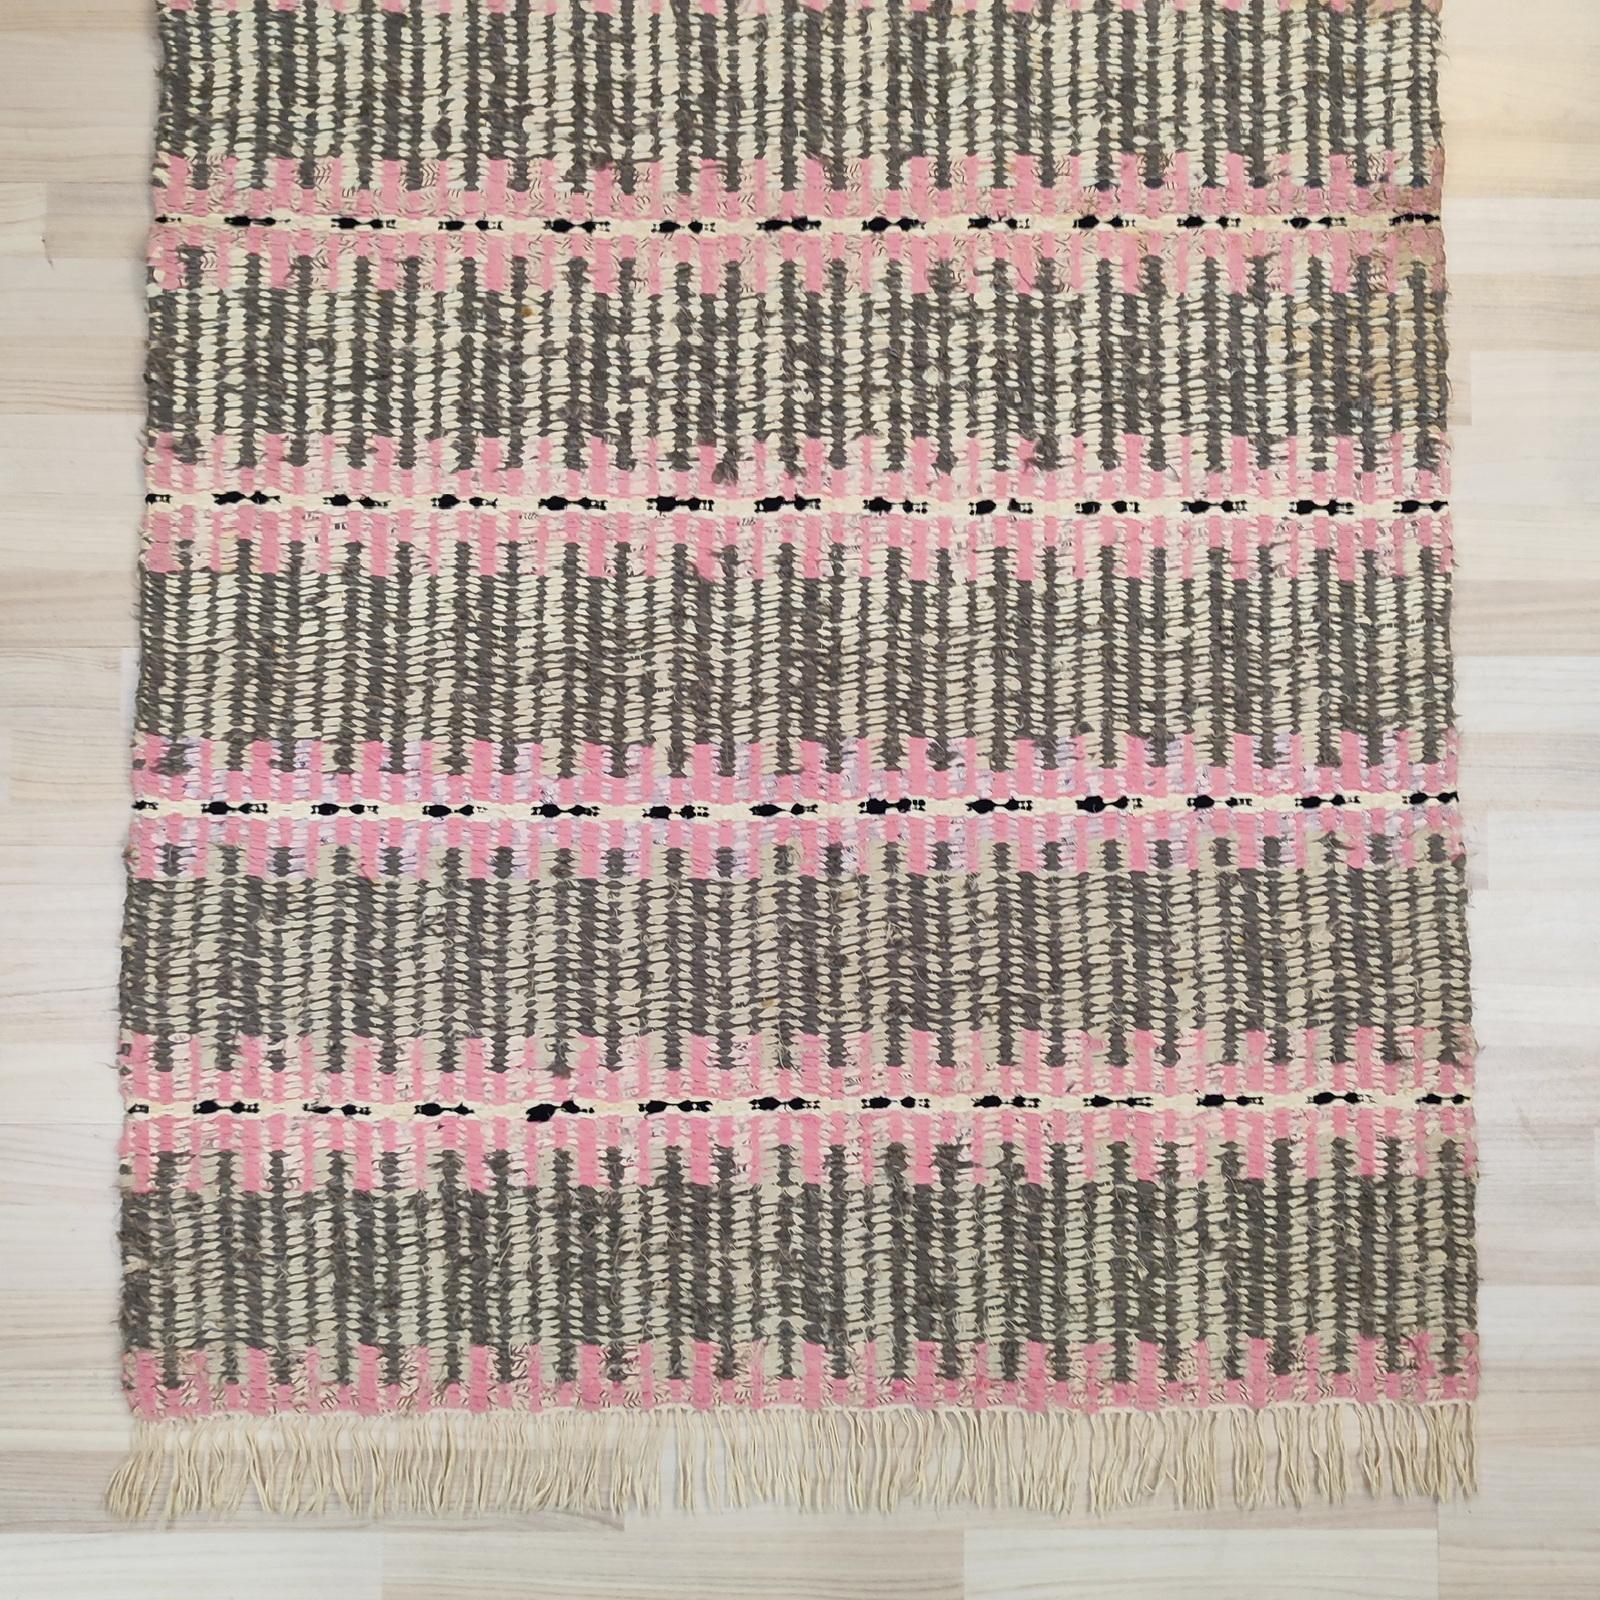 Hand-Woven Mid 20th Century Handwoven Cotton Rag Rug For Sale